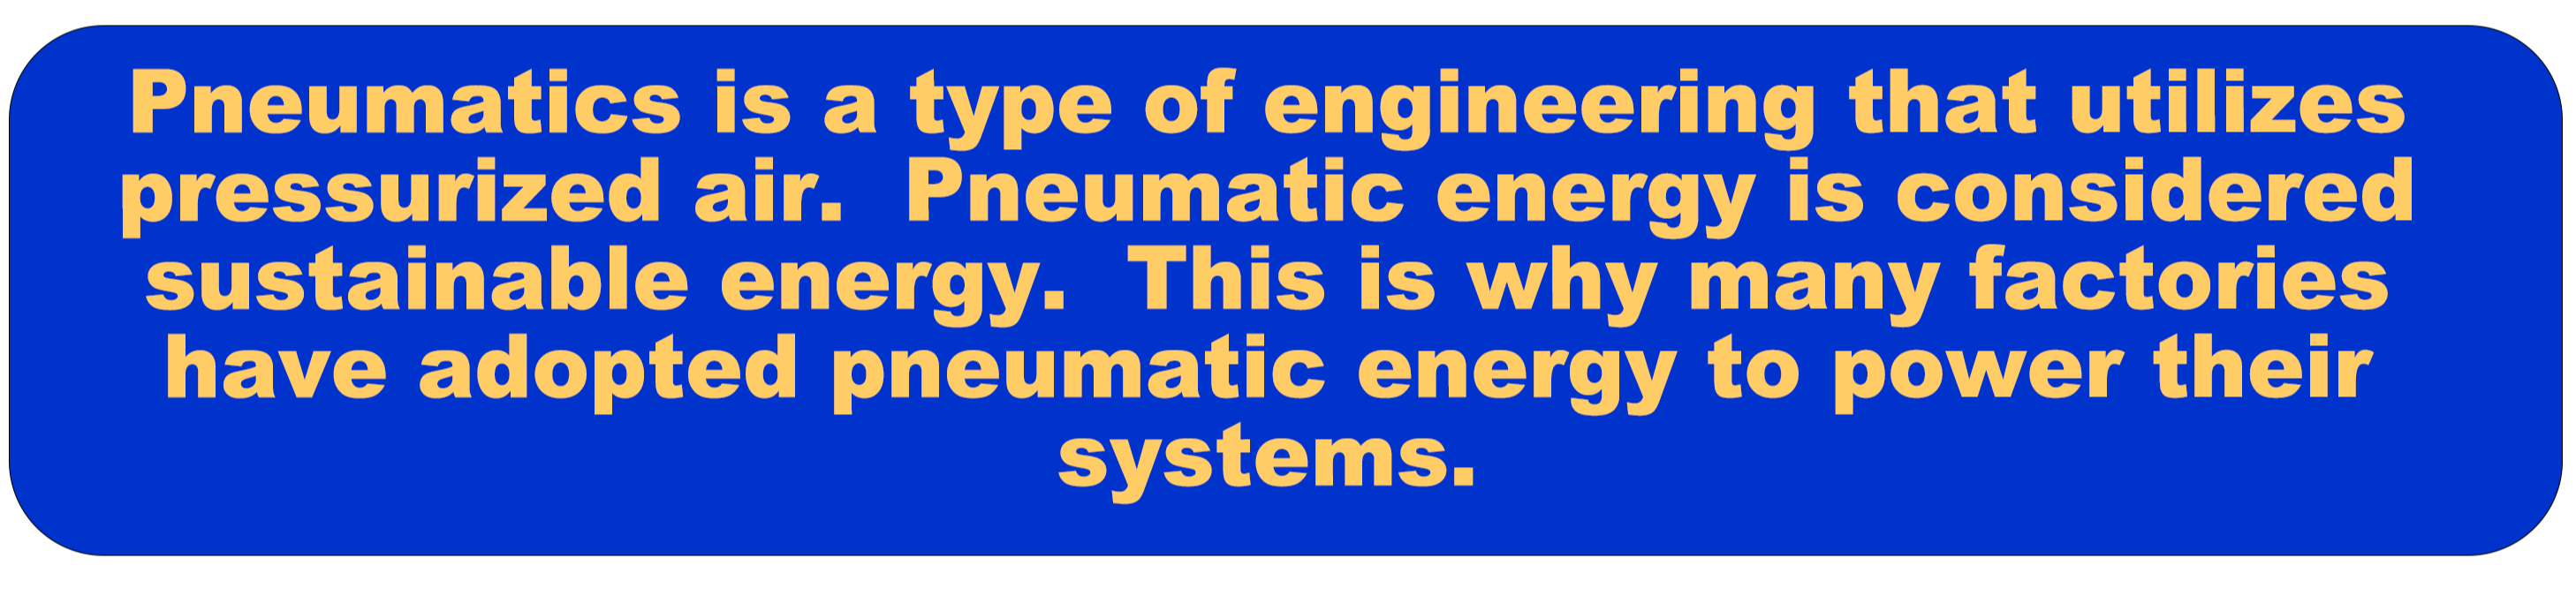 Pneumatics is a type of engineering that utilizes pressurized air. Pneumatic energy is considered sustainable energy. This is why many factories have adopted pneumatic energy to power their systems. 